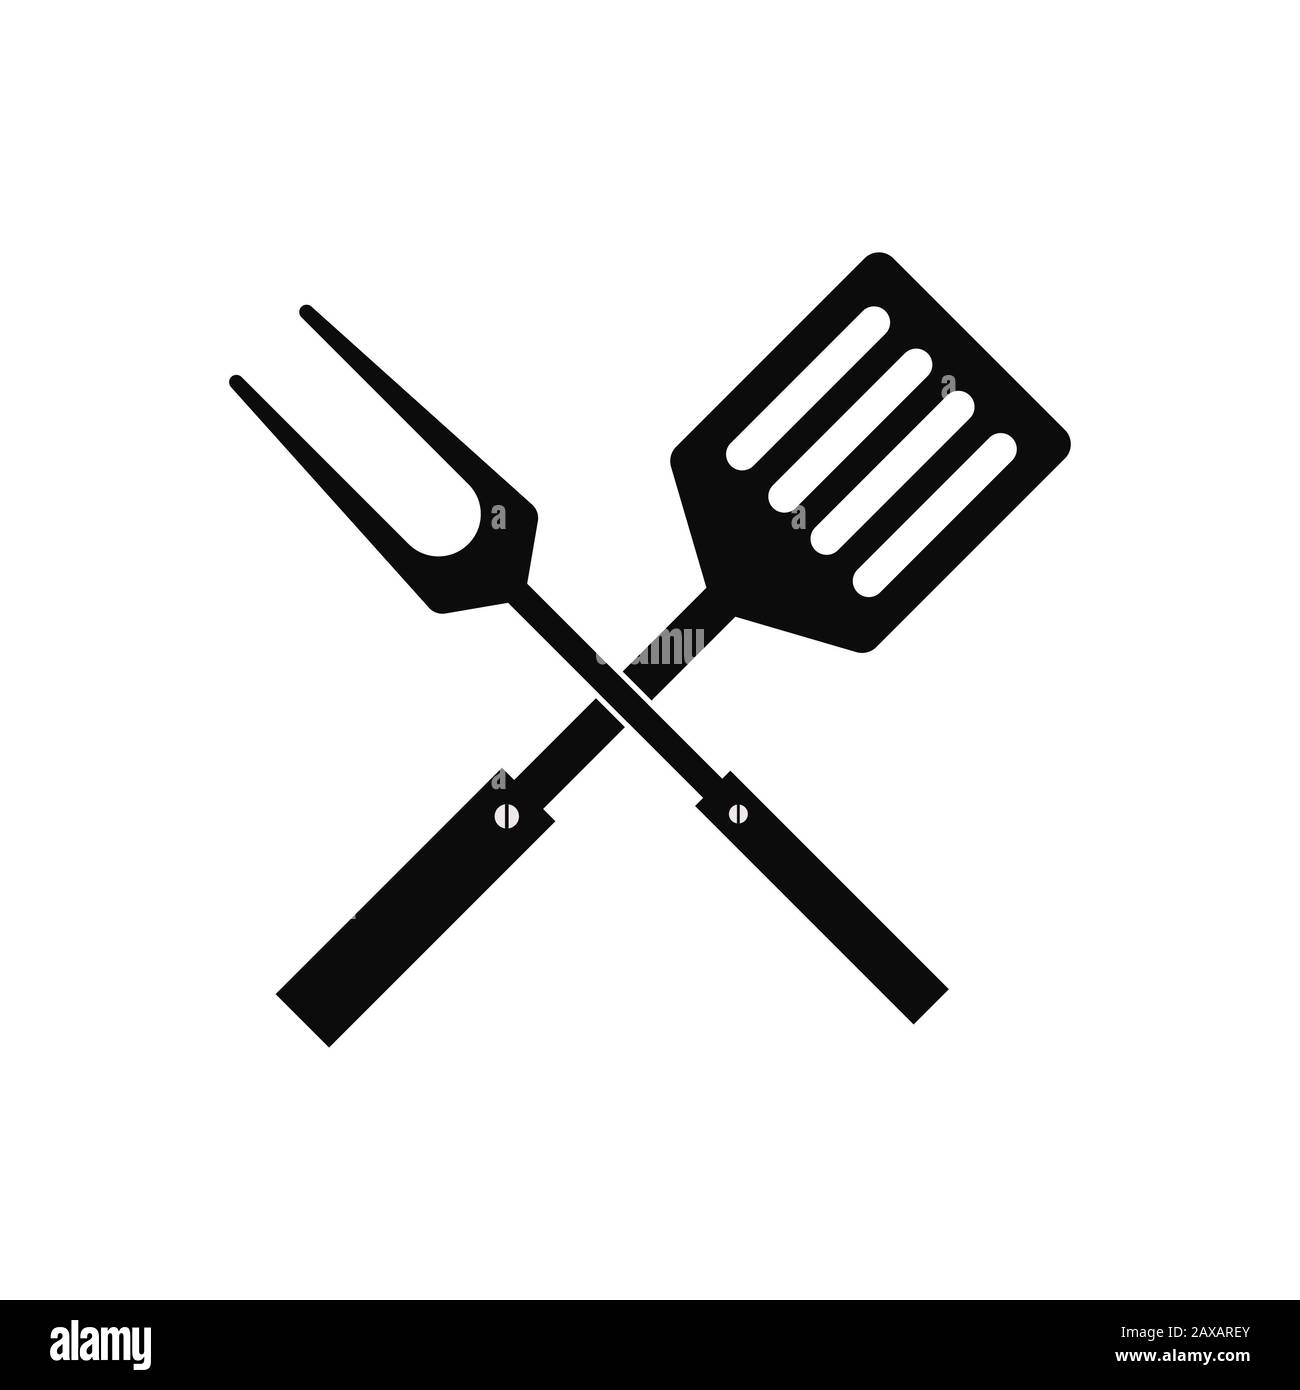 BBQ Grilling Meat And Cooking Tools Isolated Icons Vector. Beef And Pork  Ham Steak Roasting On Grate. Cutlery Spatula And Fork Knife Brush And Tongs  Royalty Free SVG, Cliparts, Vectors, and Stock